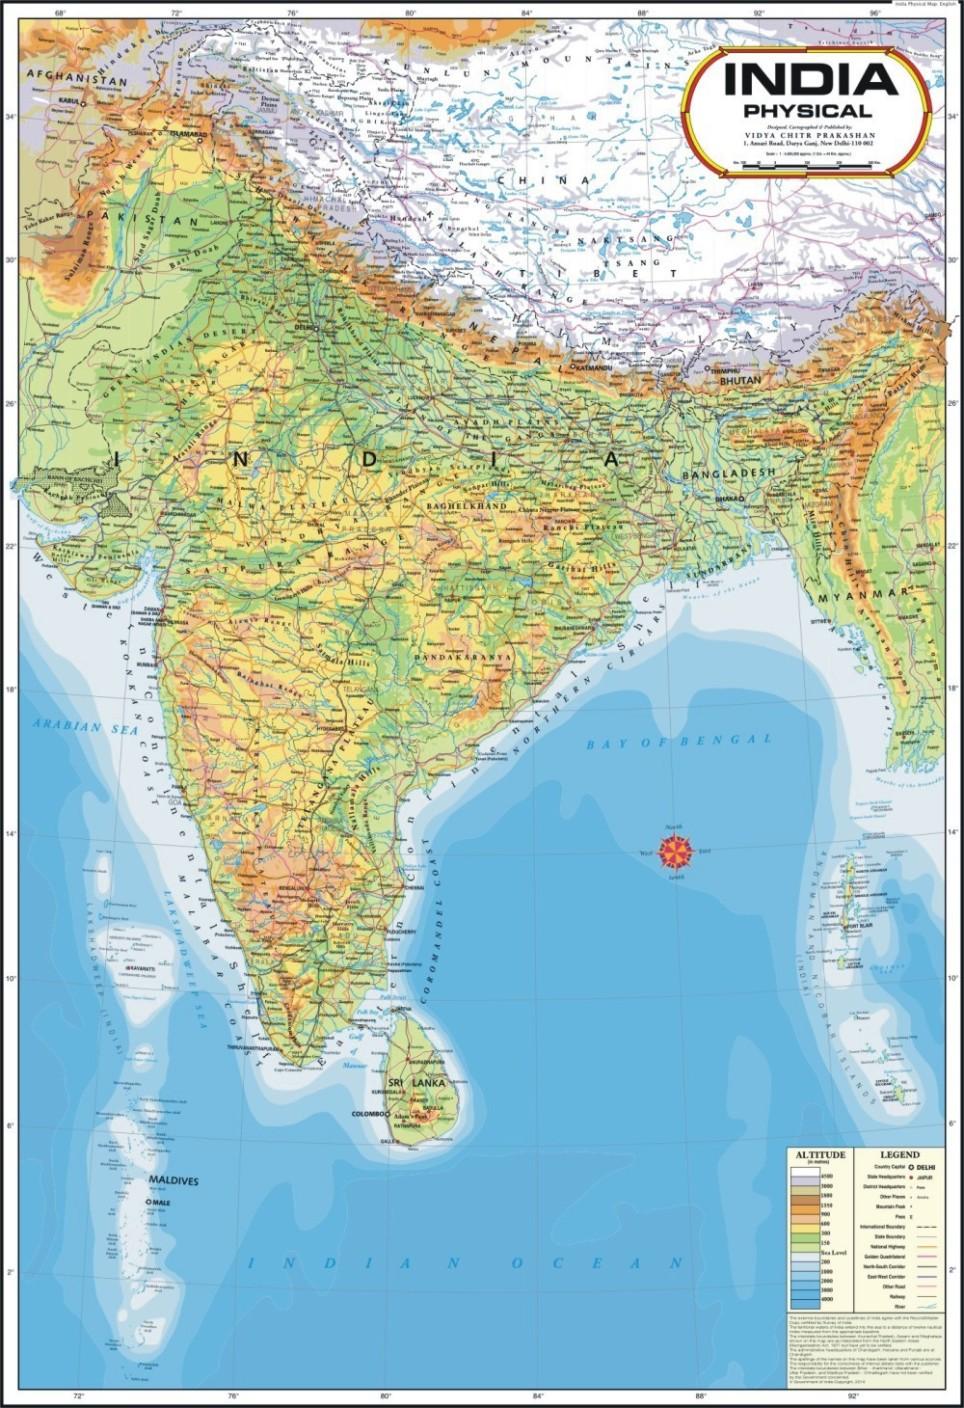 Physical map of India - India physical map (Southern Asia - Asia)